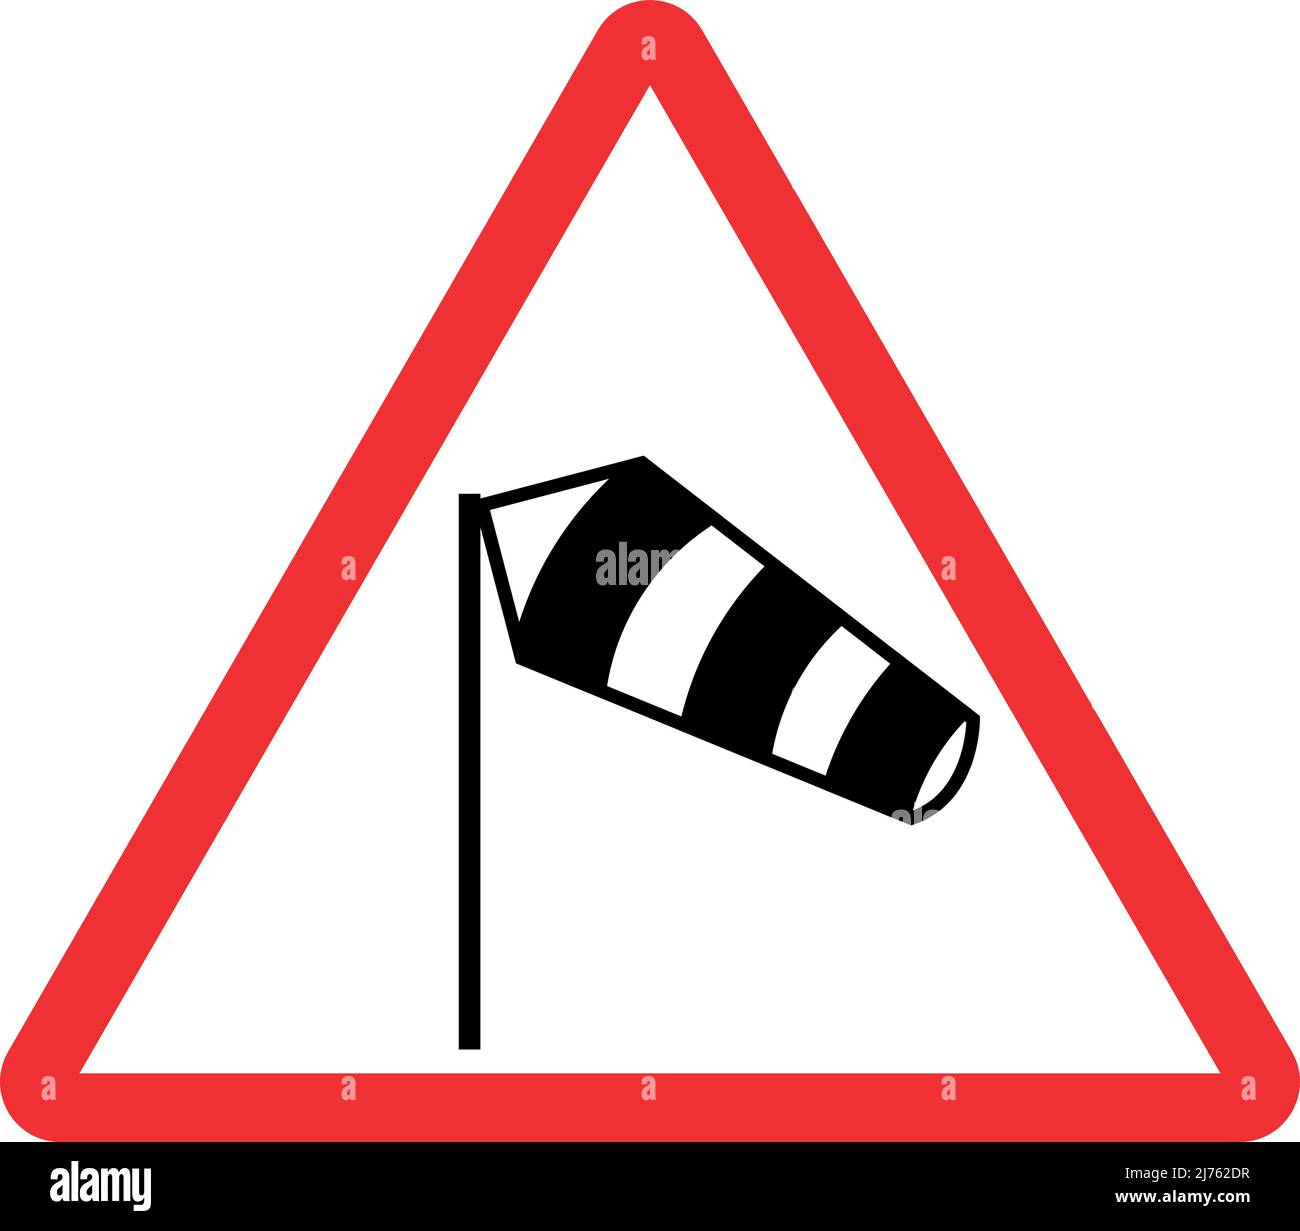 Crosswind from left warning sign. Red triangle background. Traffic signs and symbols. Stock Vector